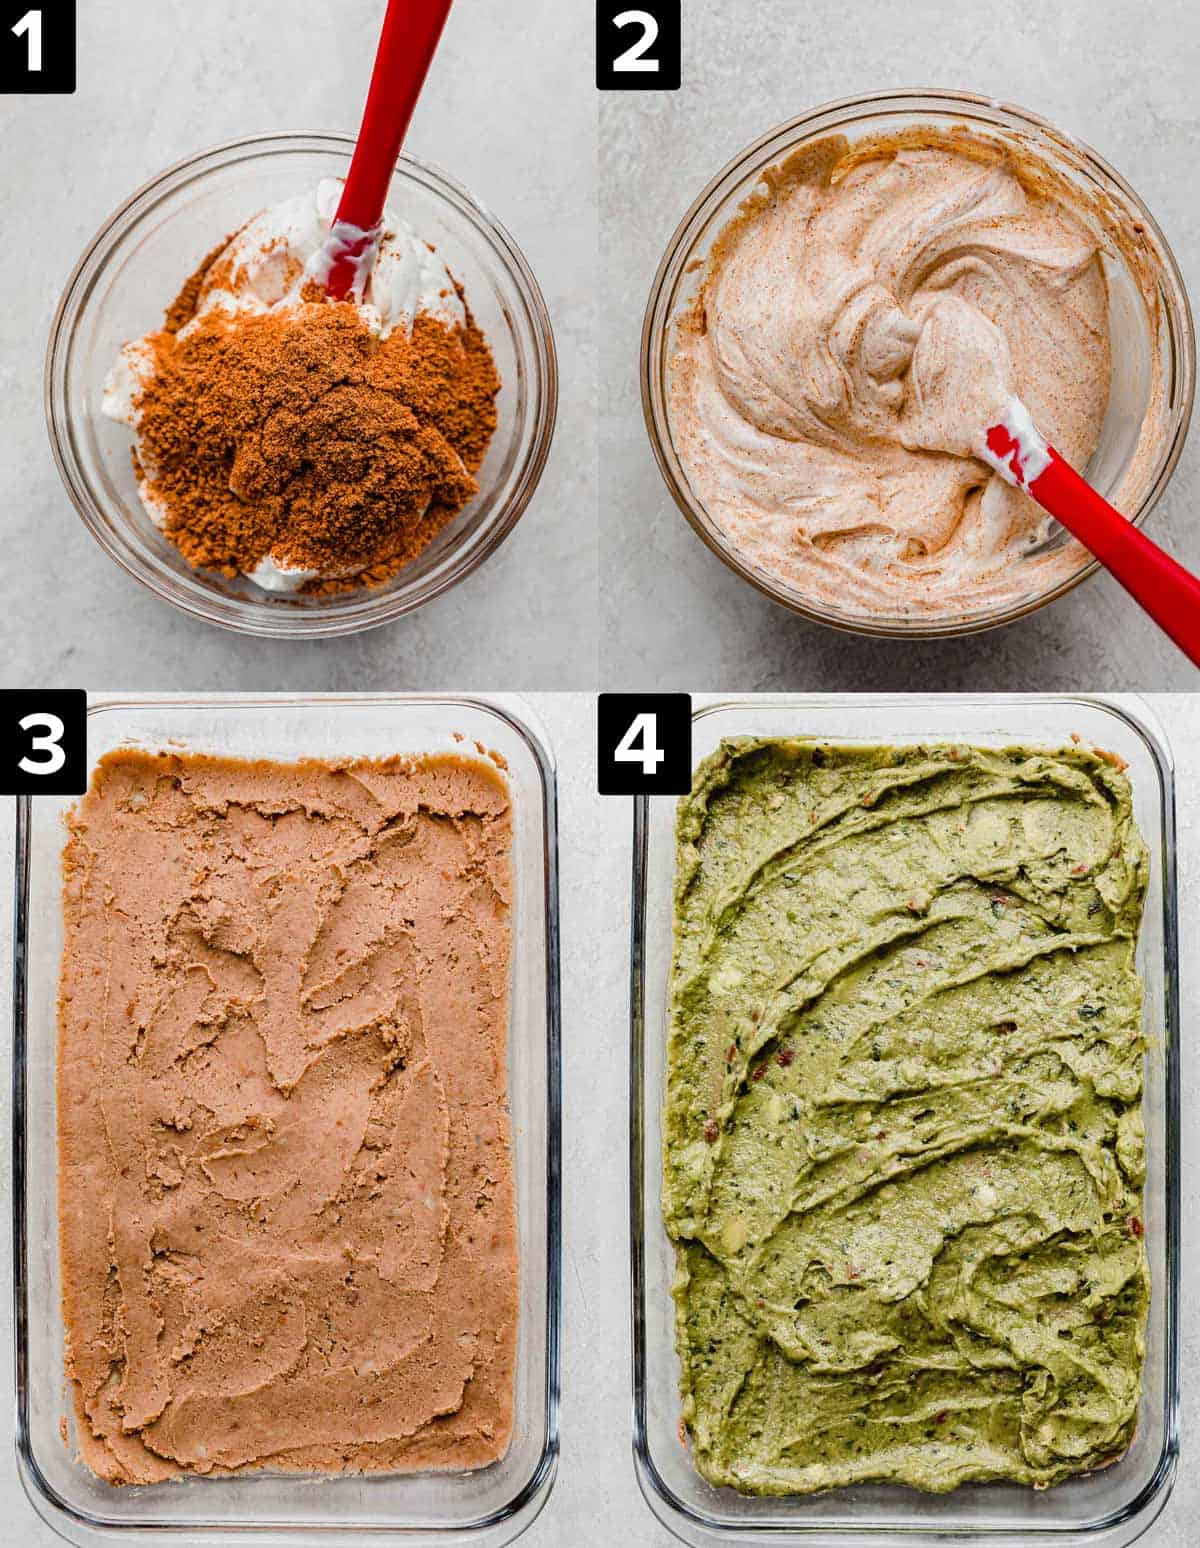 Four images showing the making of the sour cream taco layer of a Layered Taco Dip, and bottom two images show a glass rectangle pan with refried beans spread along bottom, and guacamole spread over the beans.